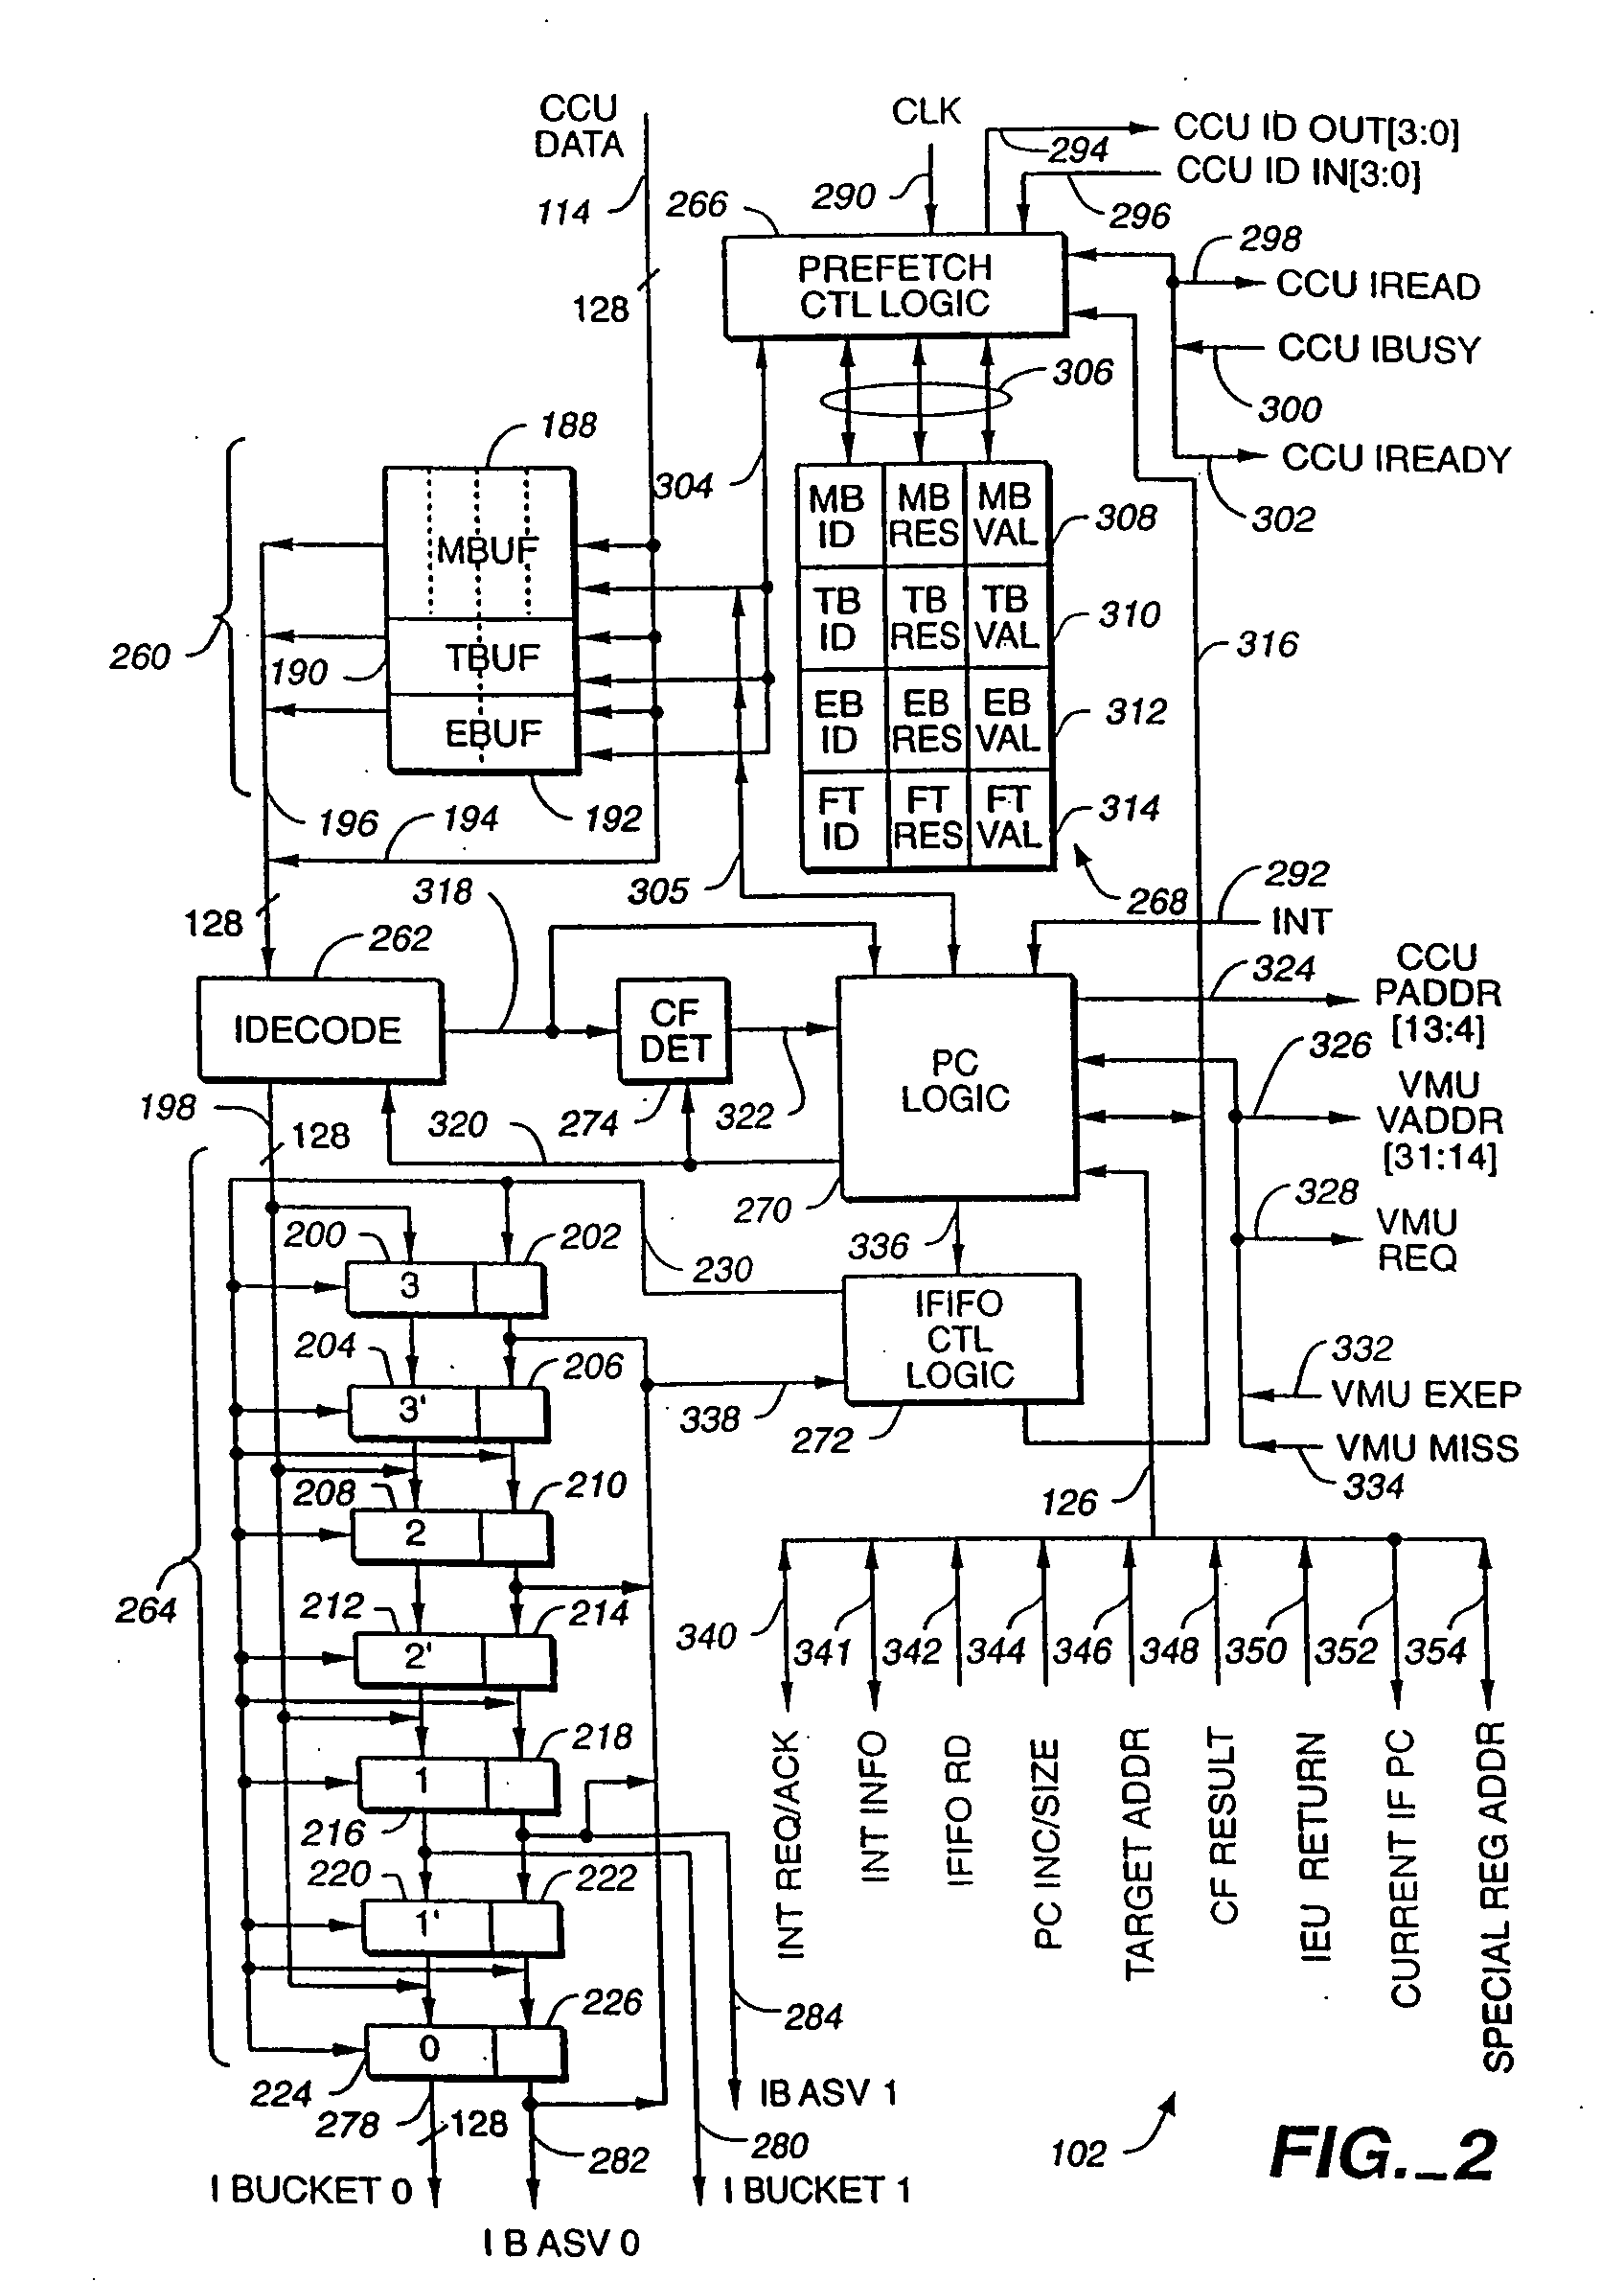 High-performance superscalar-based computer system with out-of order instruction execution and concurrent results distribution